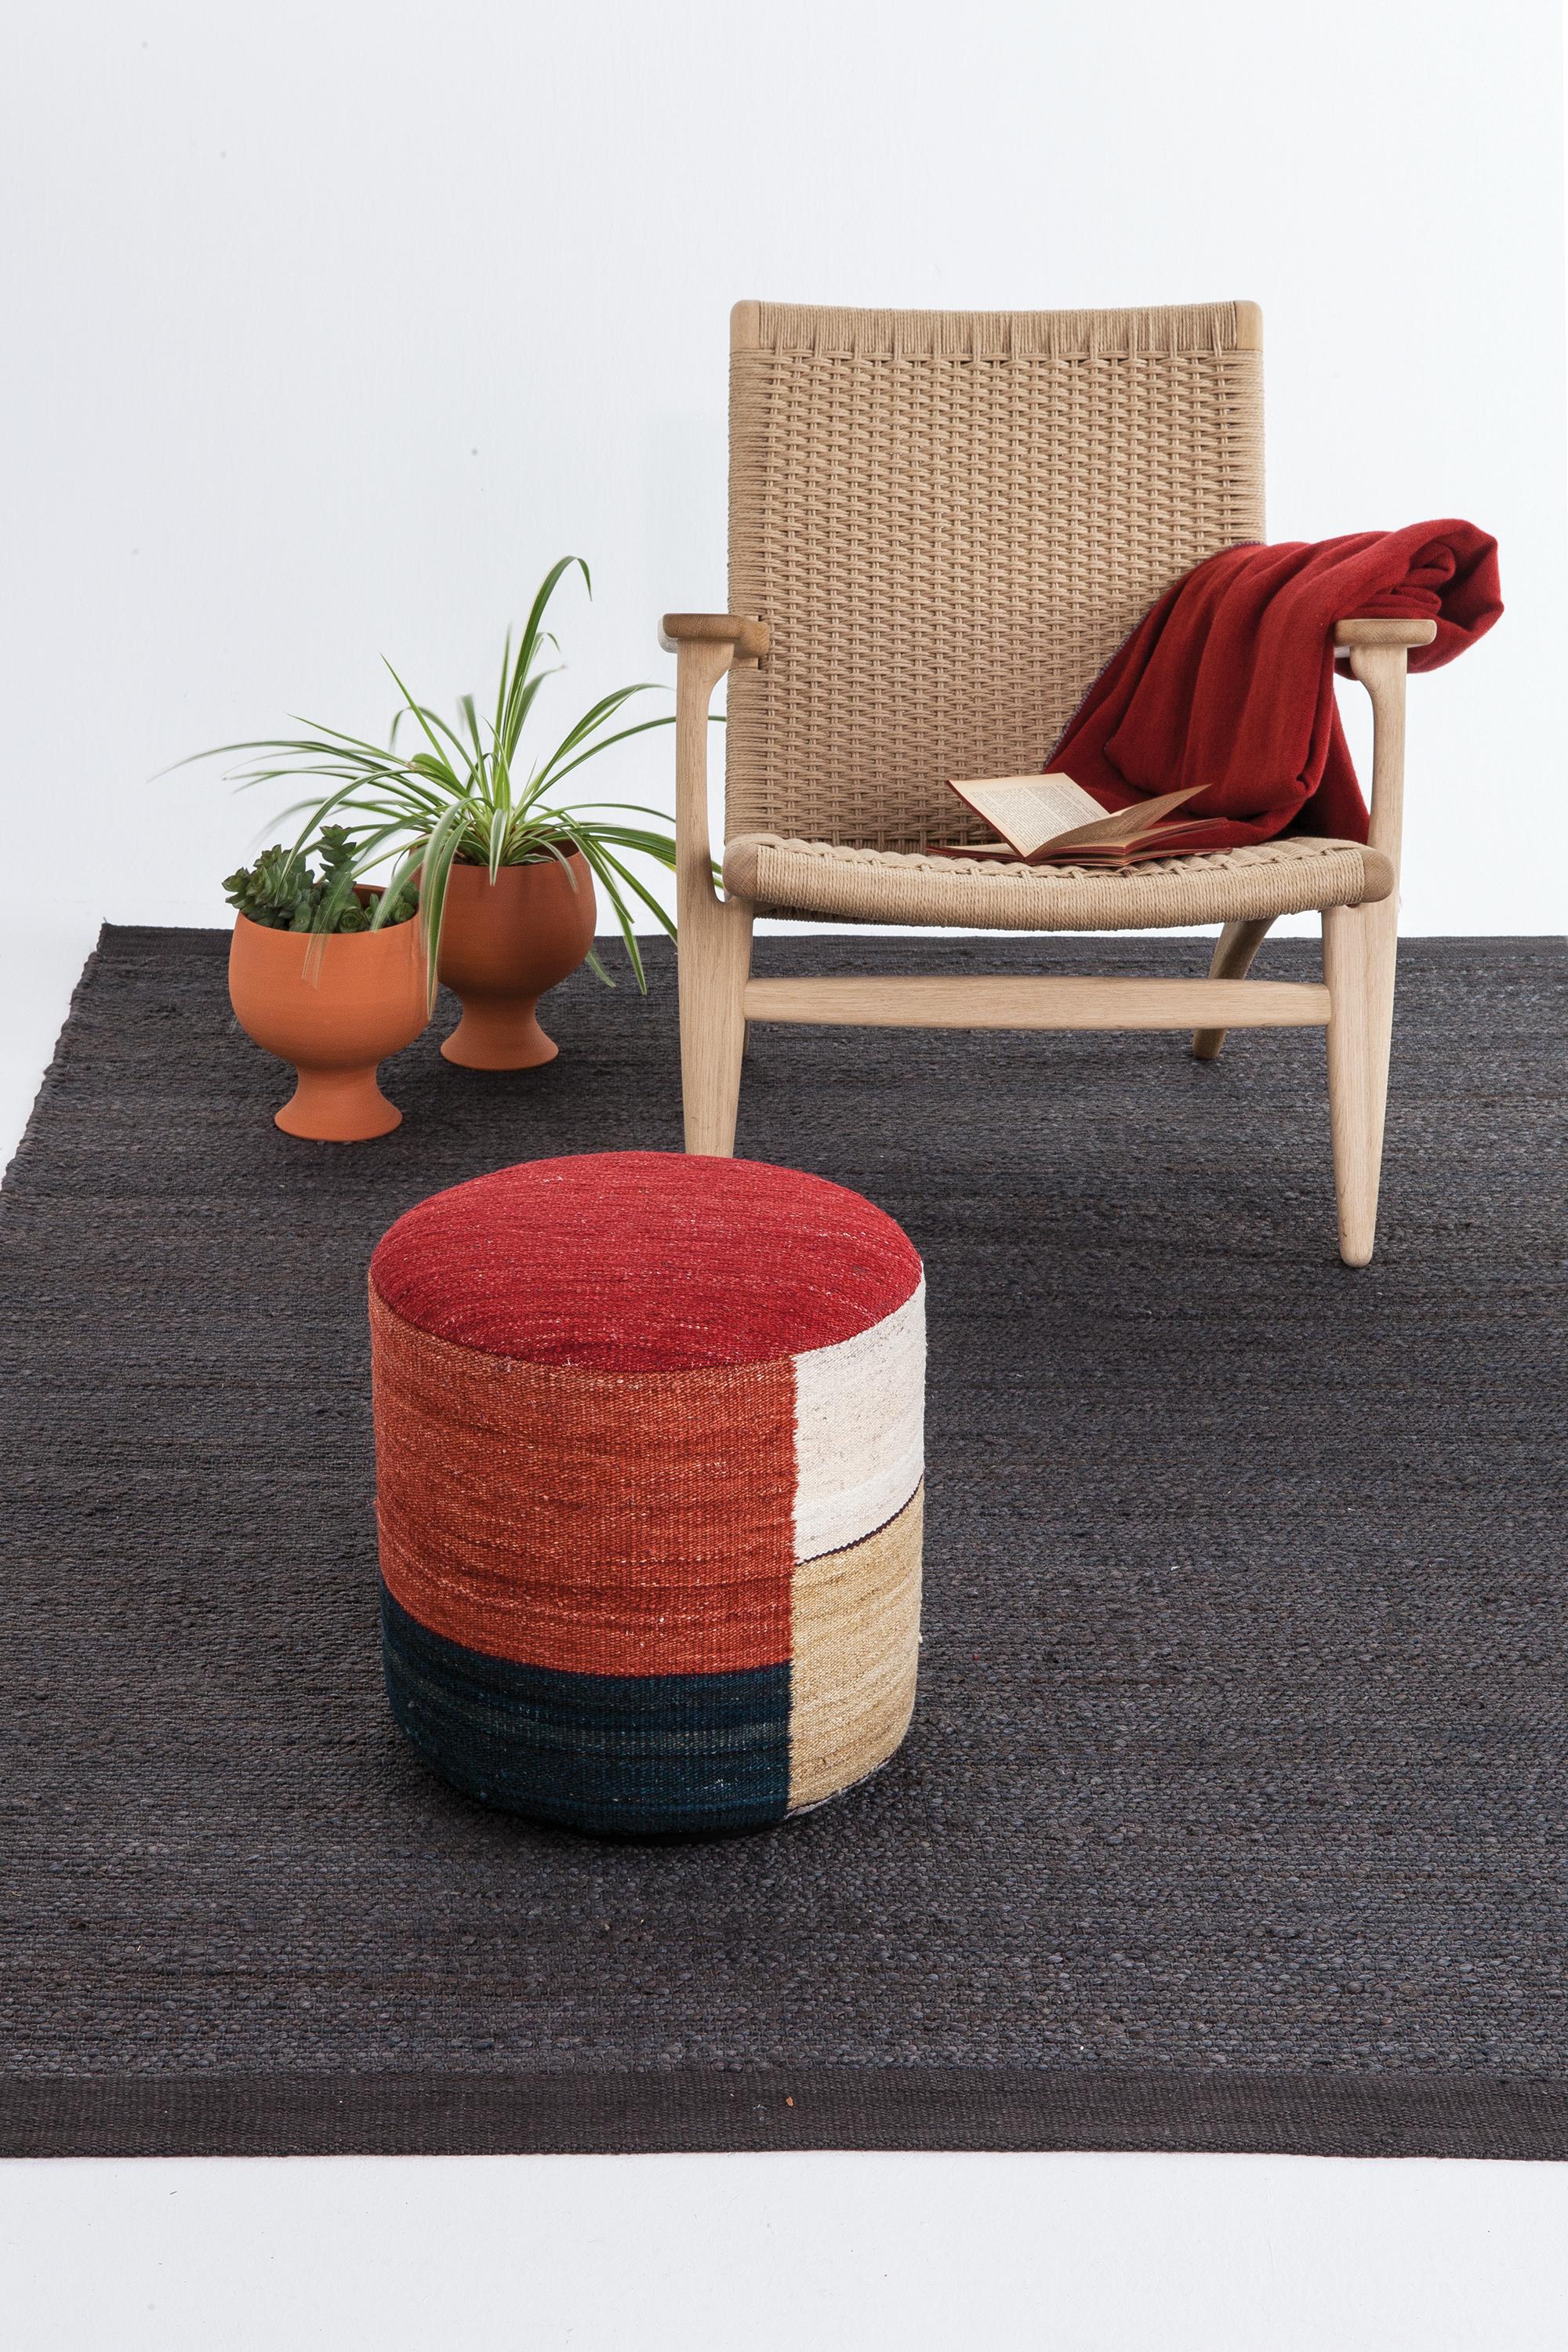 Wool 'Kilim 2' Pouf by Nani Marquina and Marcos Catalán for Nanimarquina For Sale